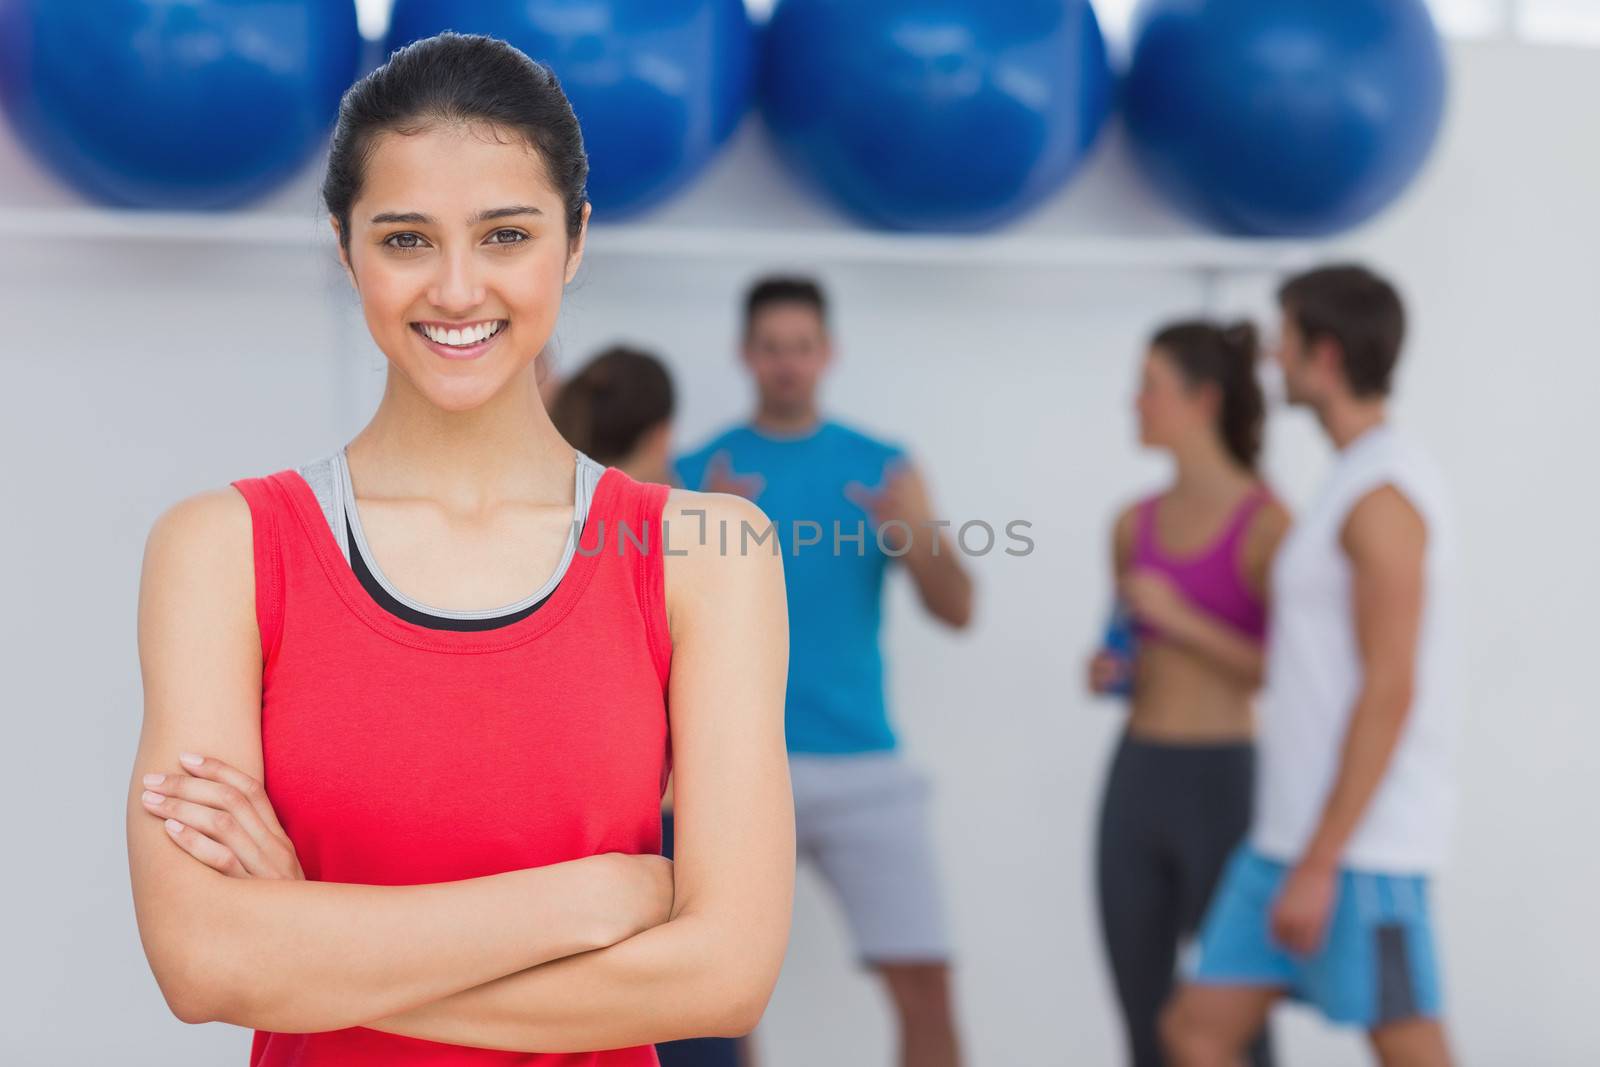 Smiling woman with friends in background at fitness studio by Wavebreakmedia